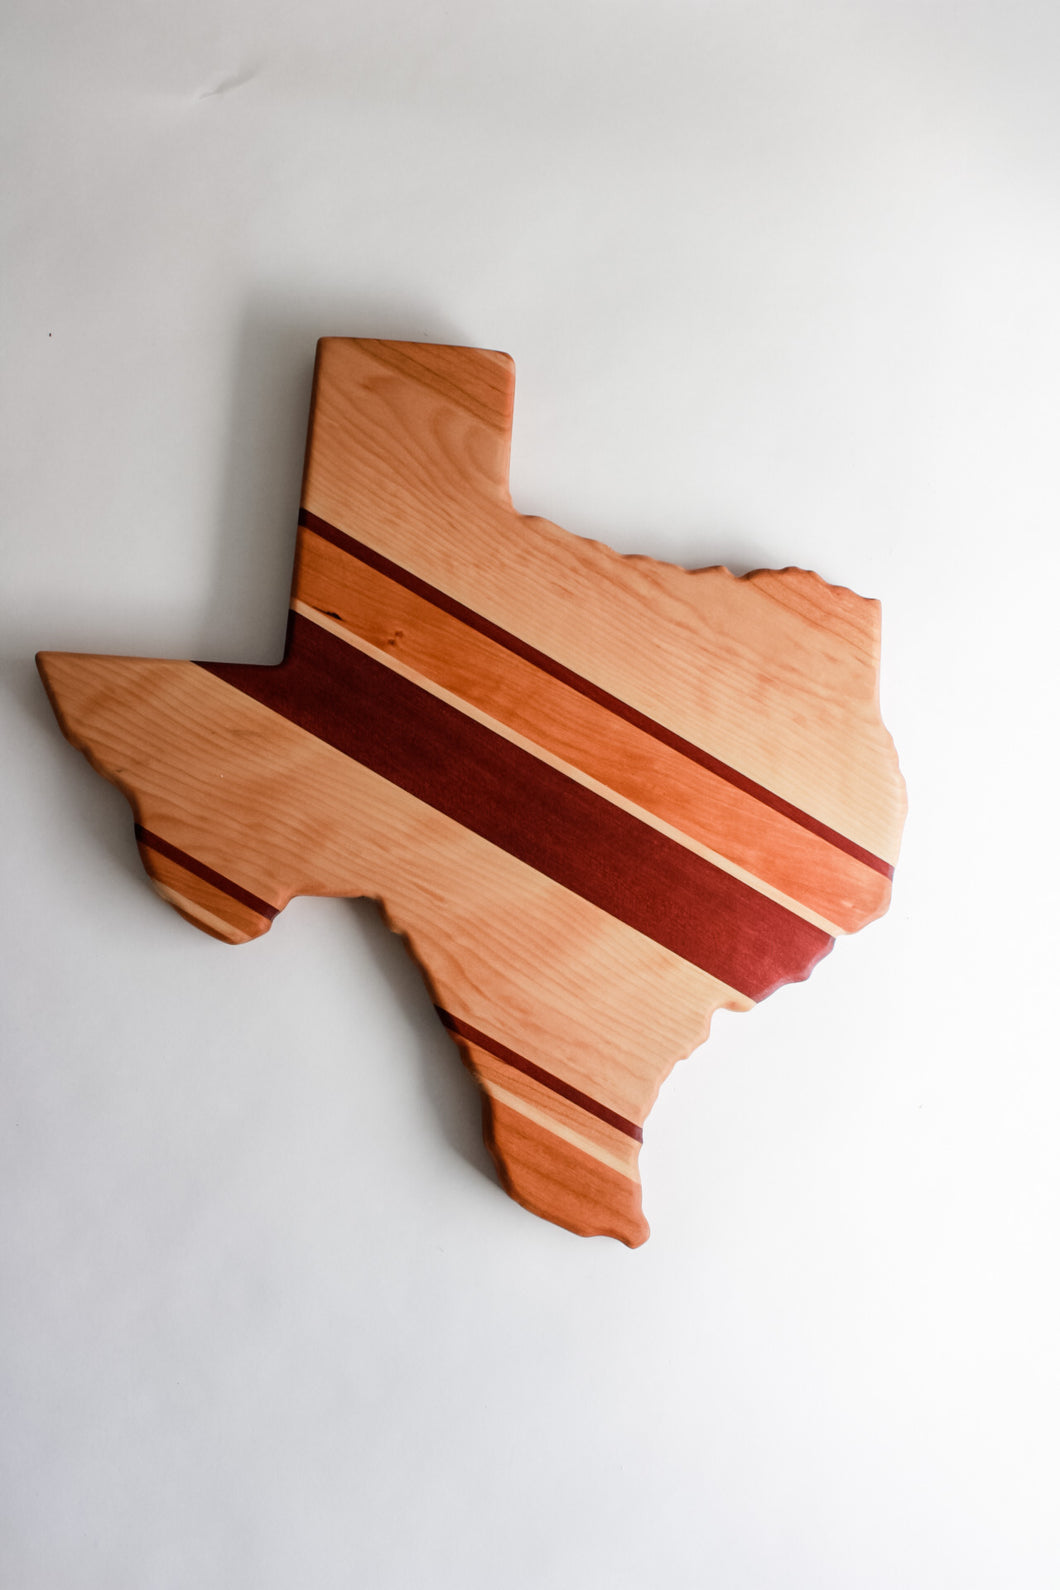 Texas shaped cutting board made with cherry, maple, and purpleheart